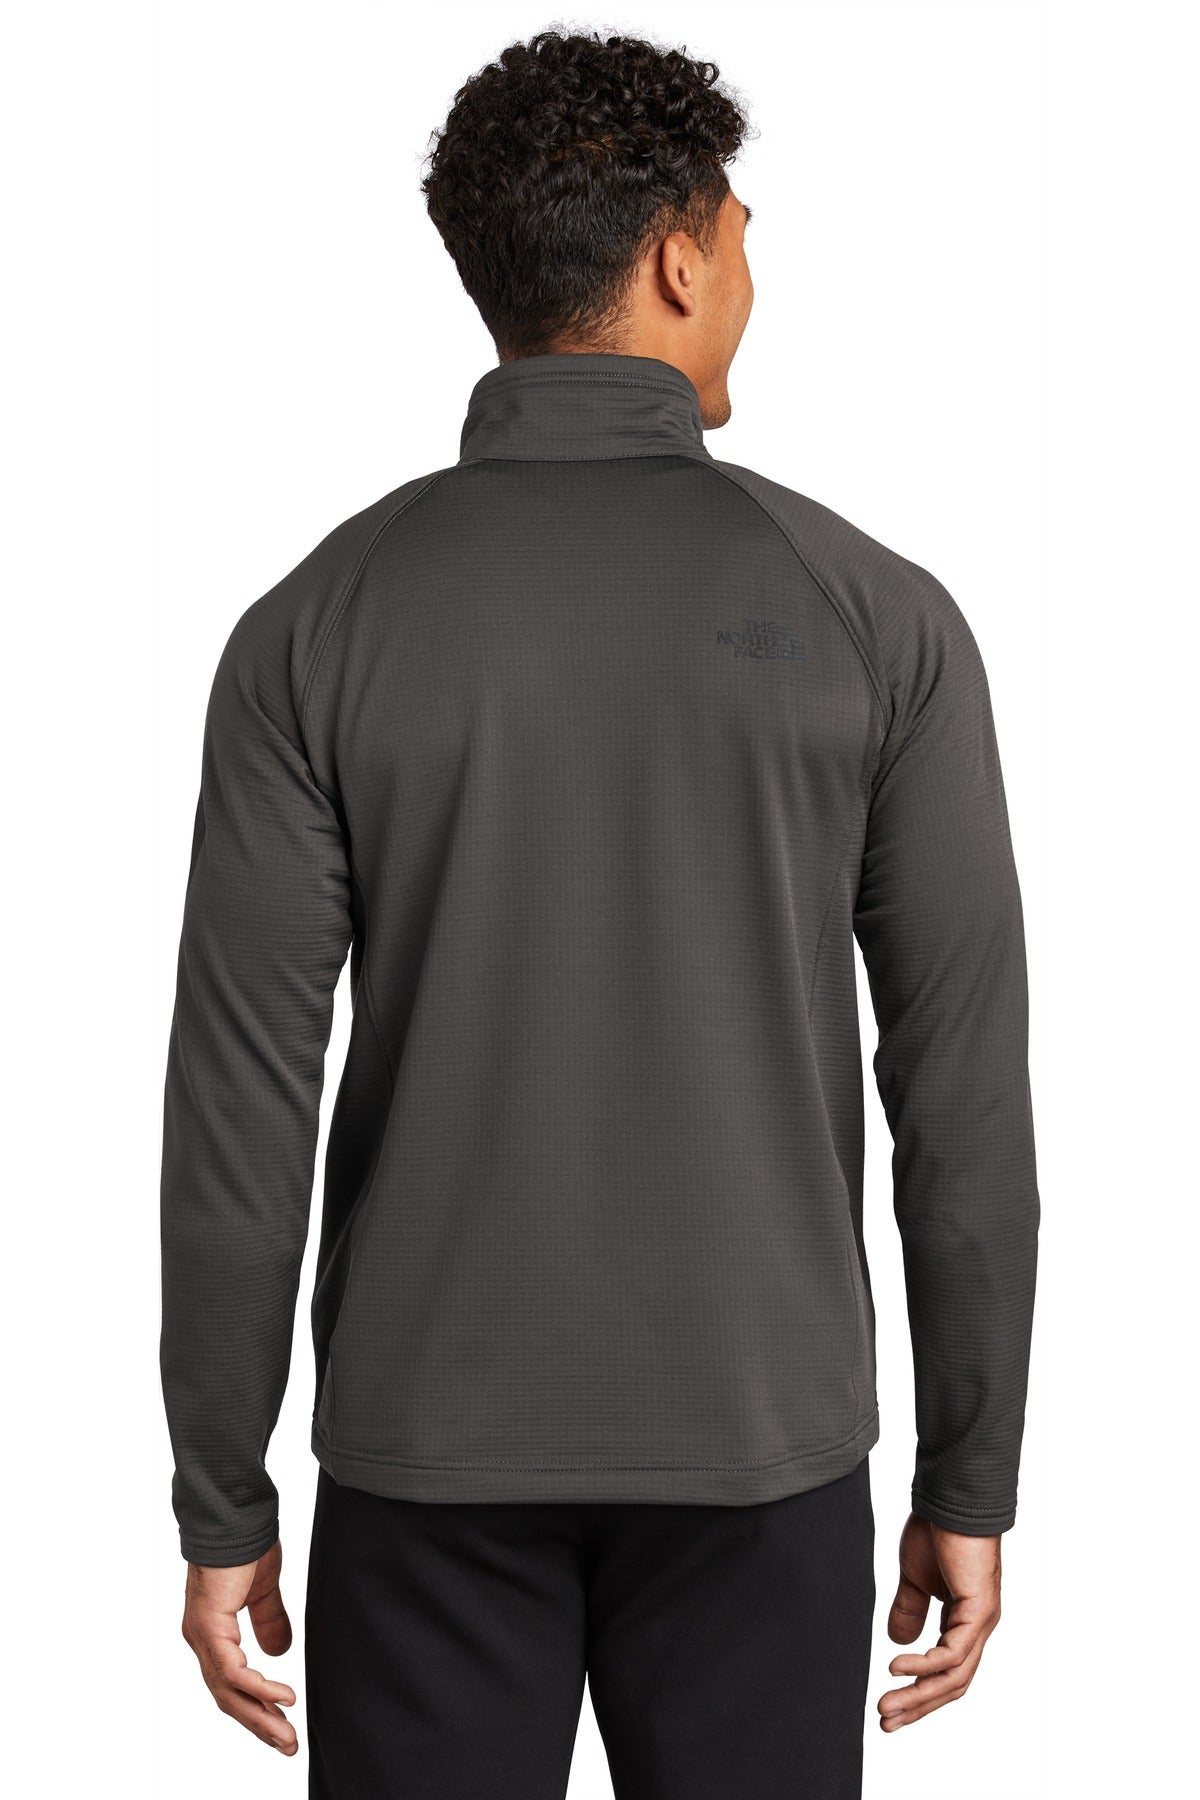 The North Face ® Mountain Peaks Full-Zip Fleece Jacket NF0A47FD - DFW Impression